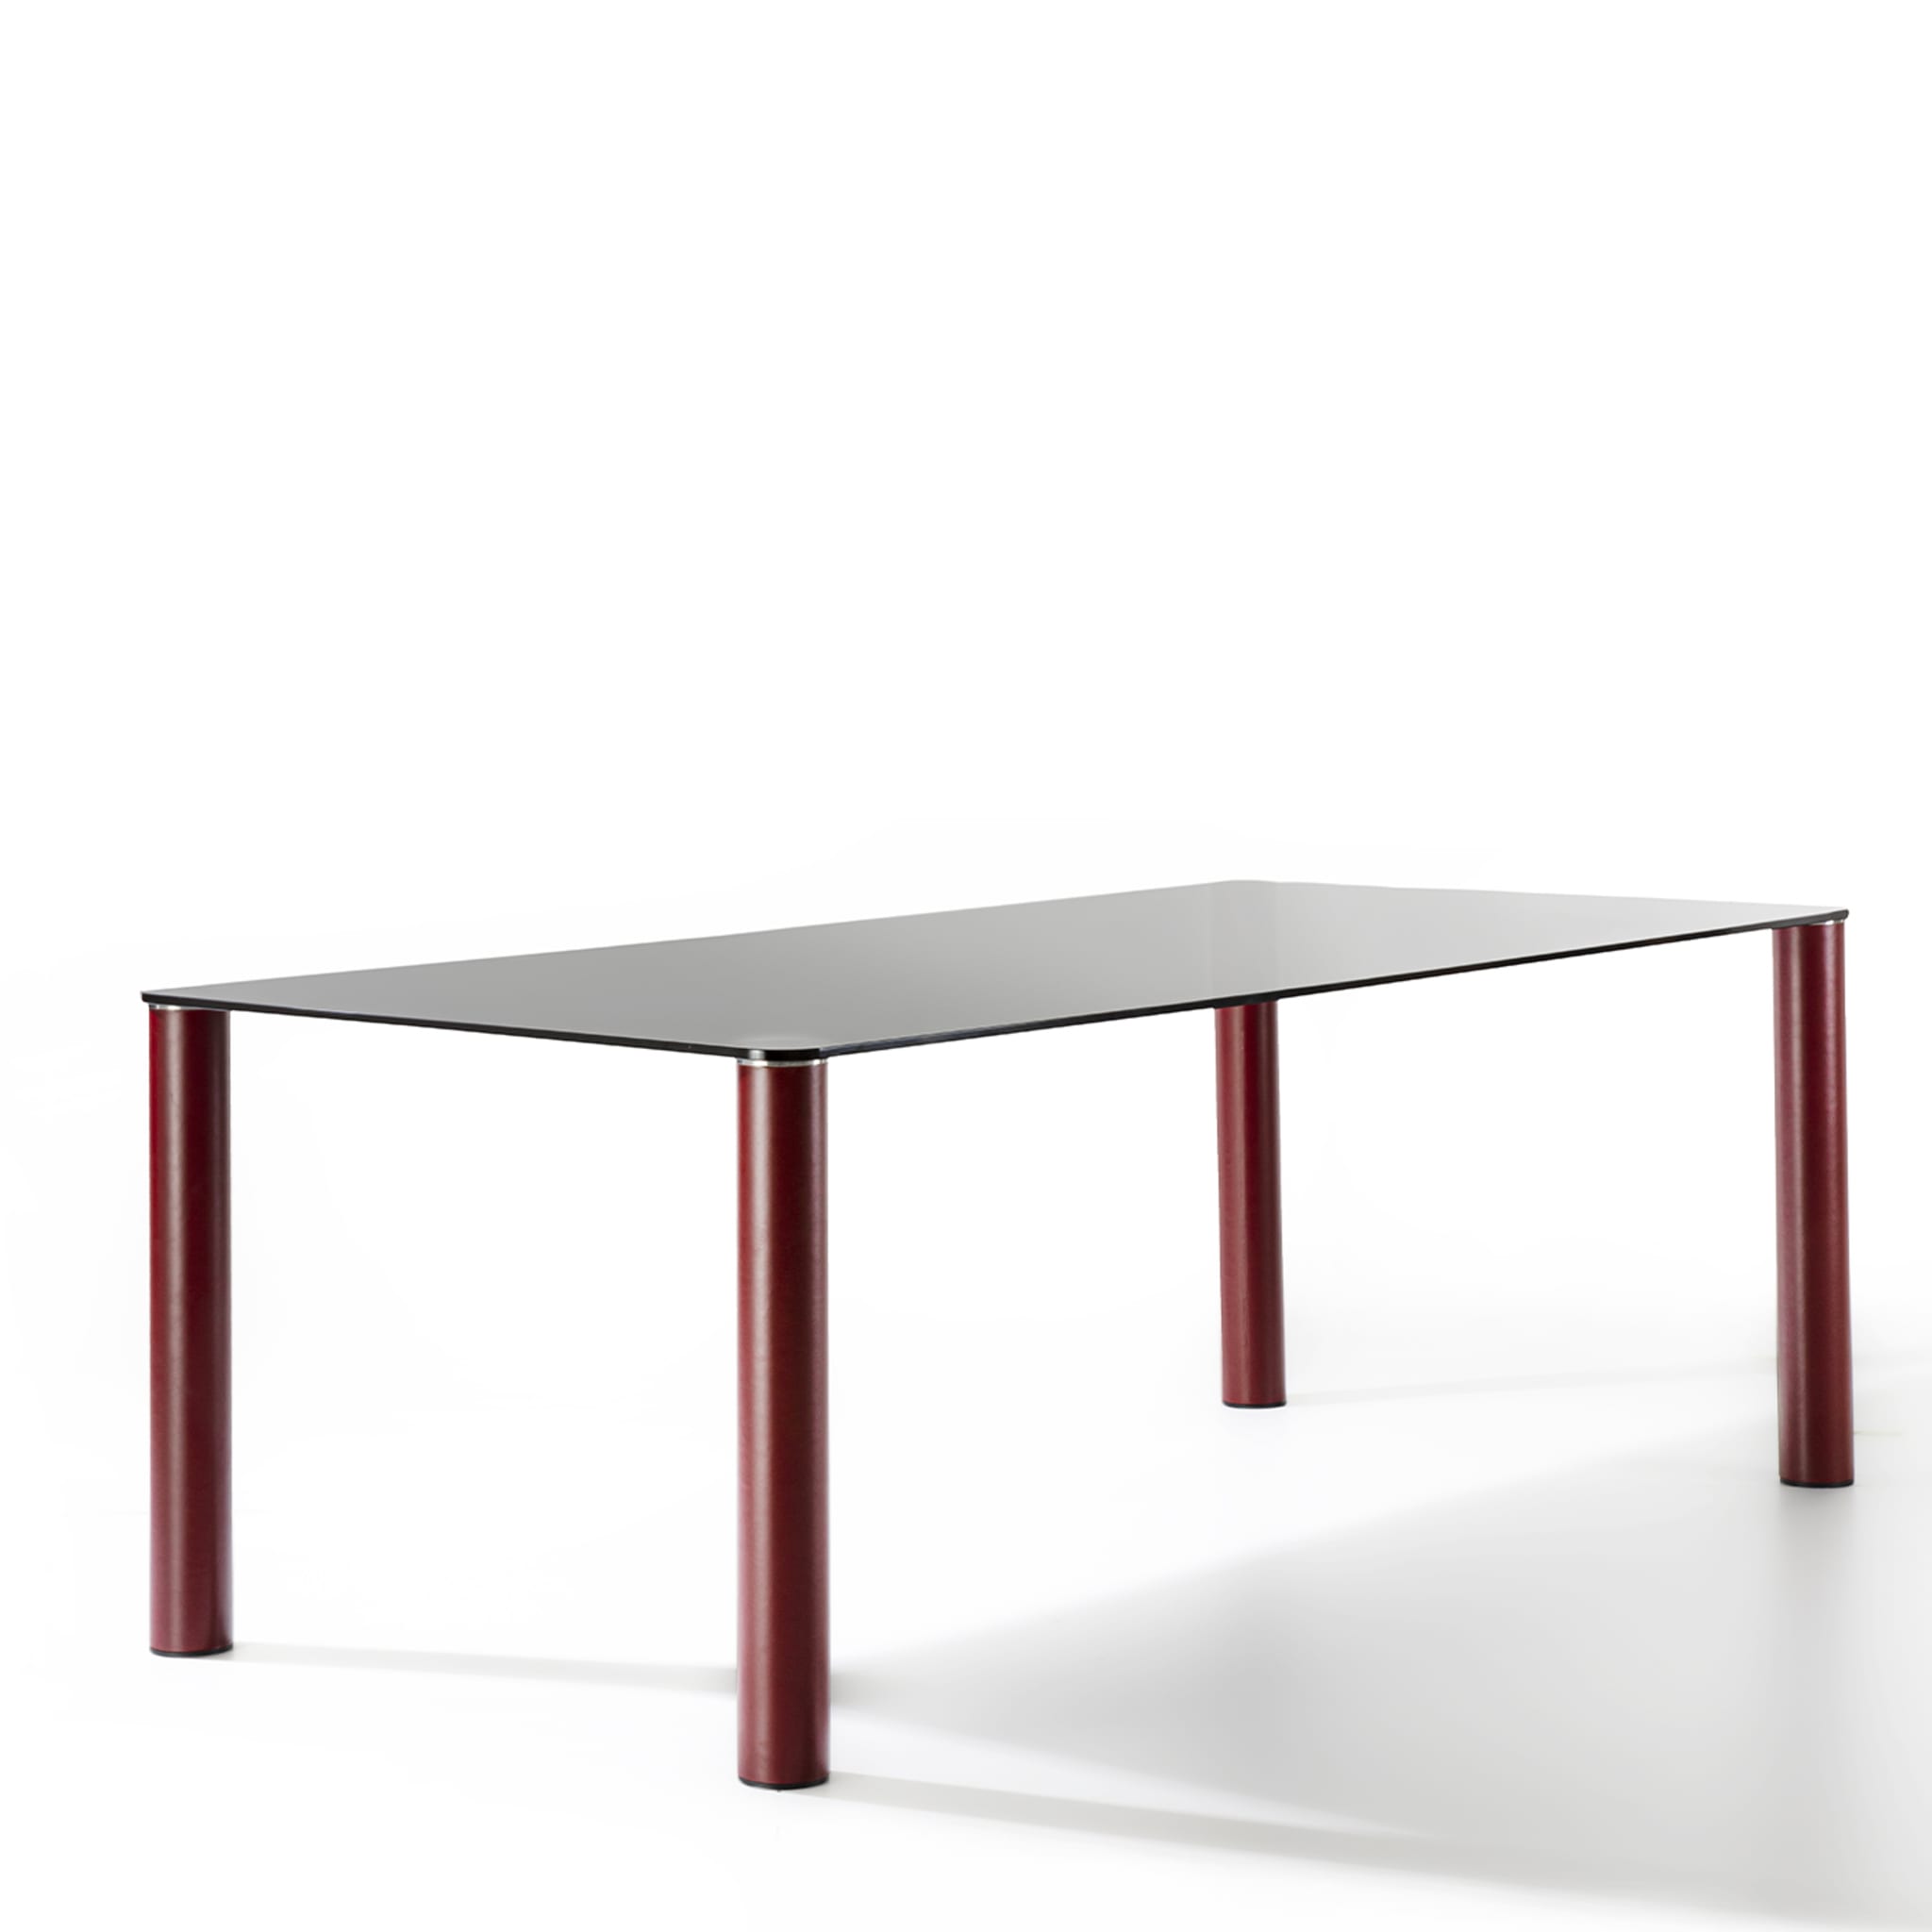 Fagus Smoked Burgundy Dining Table - Alternative view 2